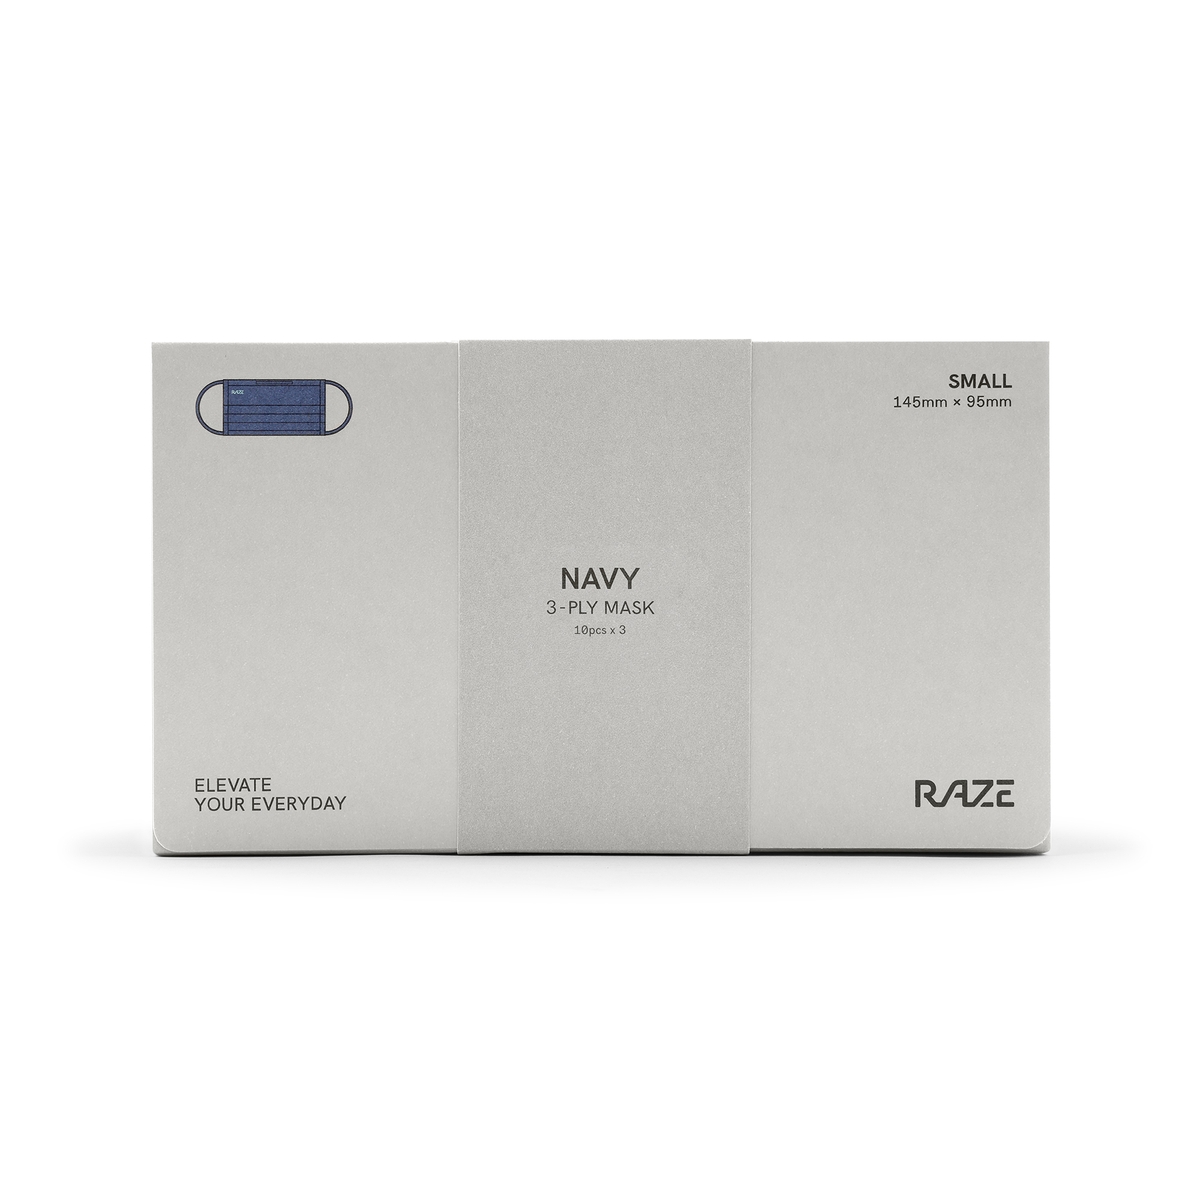 Navy 3-Ply Mask Small